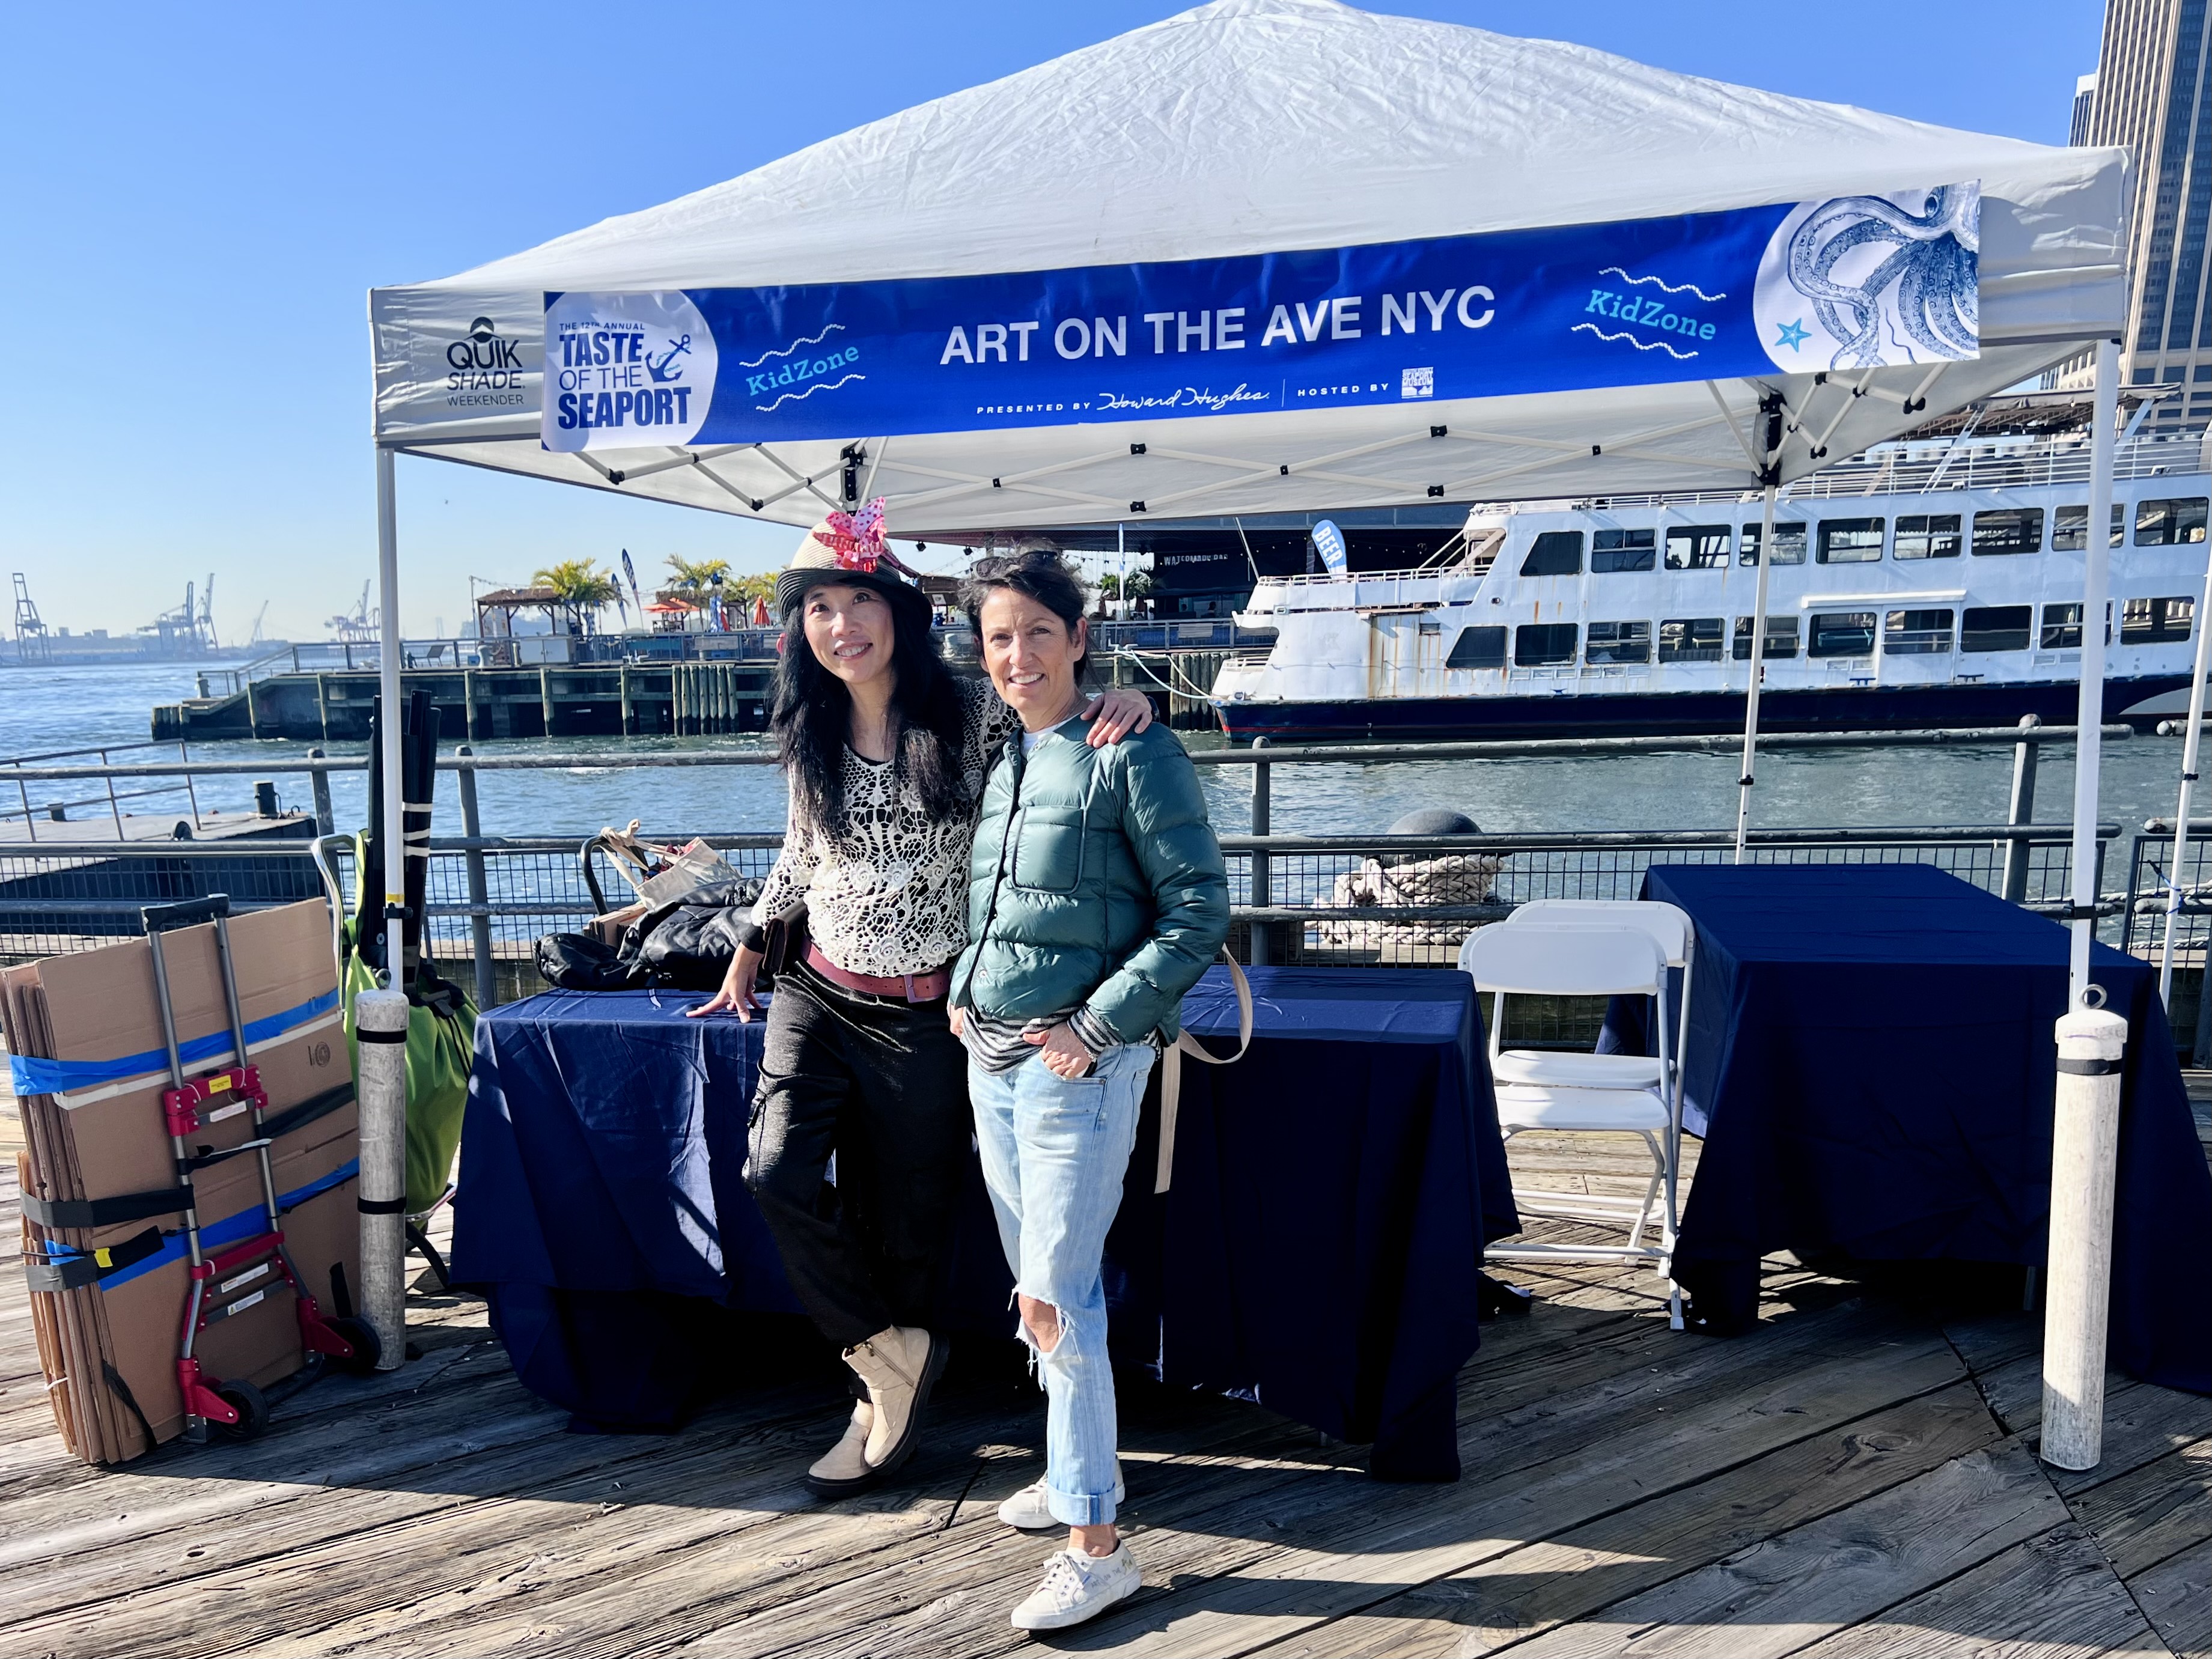 Barbara at Seaport with artist Fina Yeung where they hosted a children's workshop in Sept 2022.